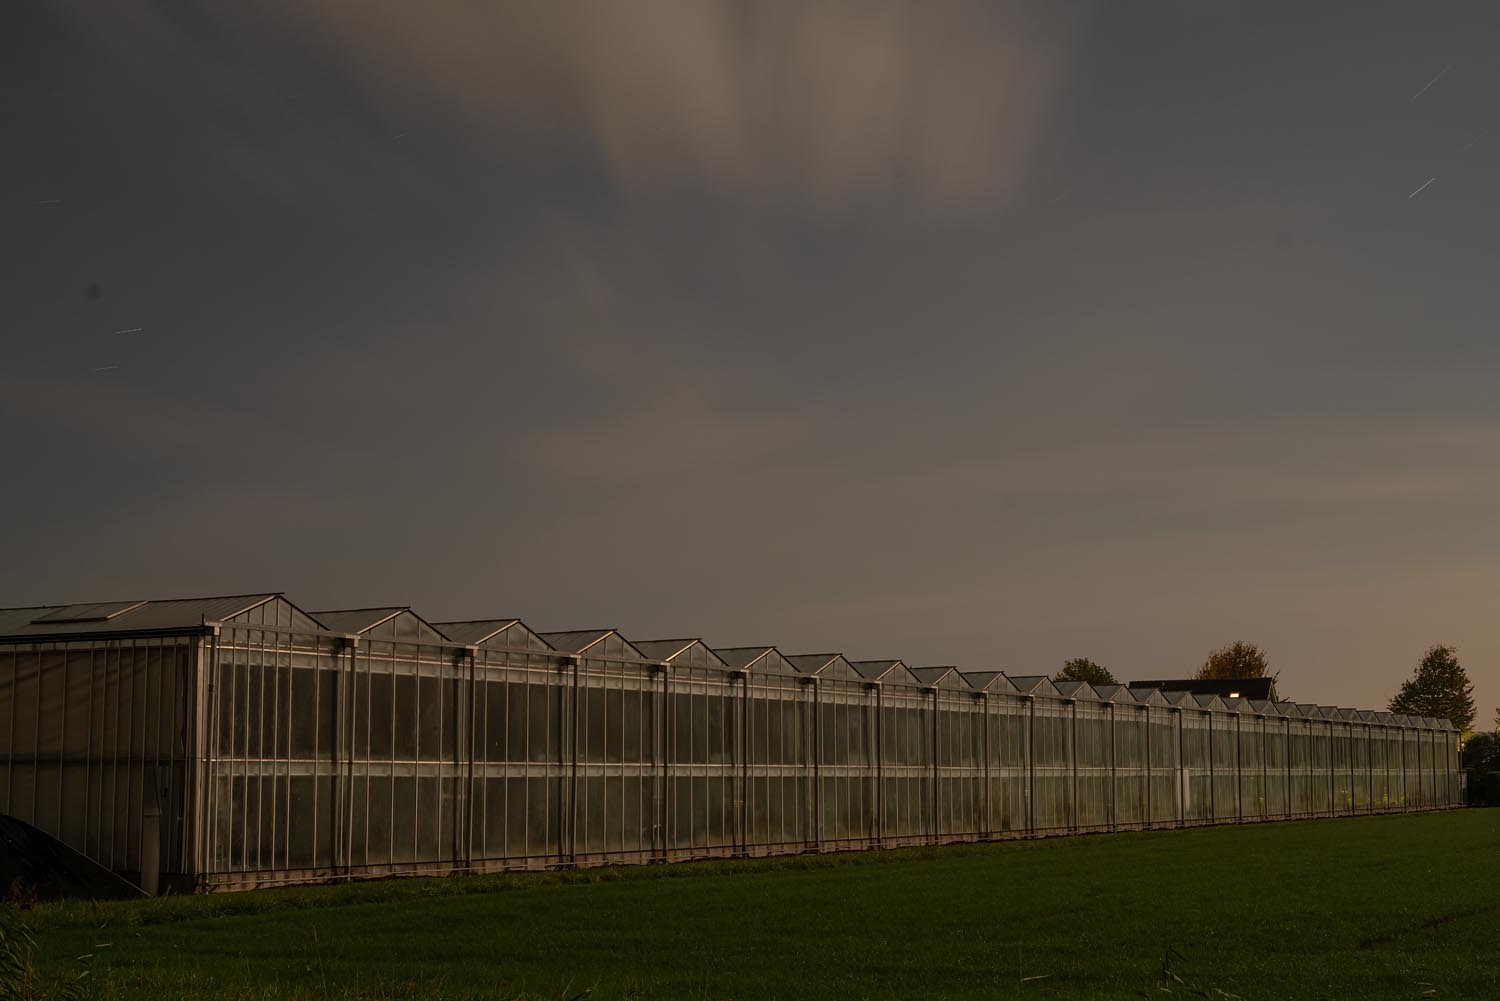 Sites at Risk of Climate Change: Night Landscape Photographs in The Netherlands, Steve Giovinco, Greenhouse Tulips, Factory-Like Building Flevoland